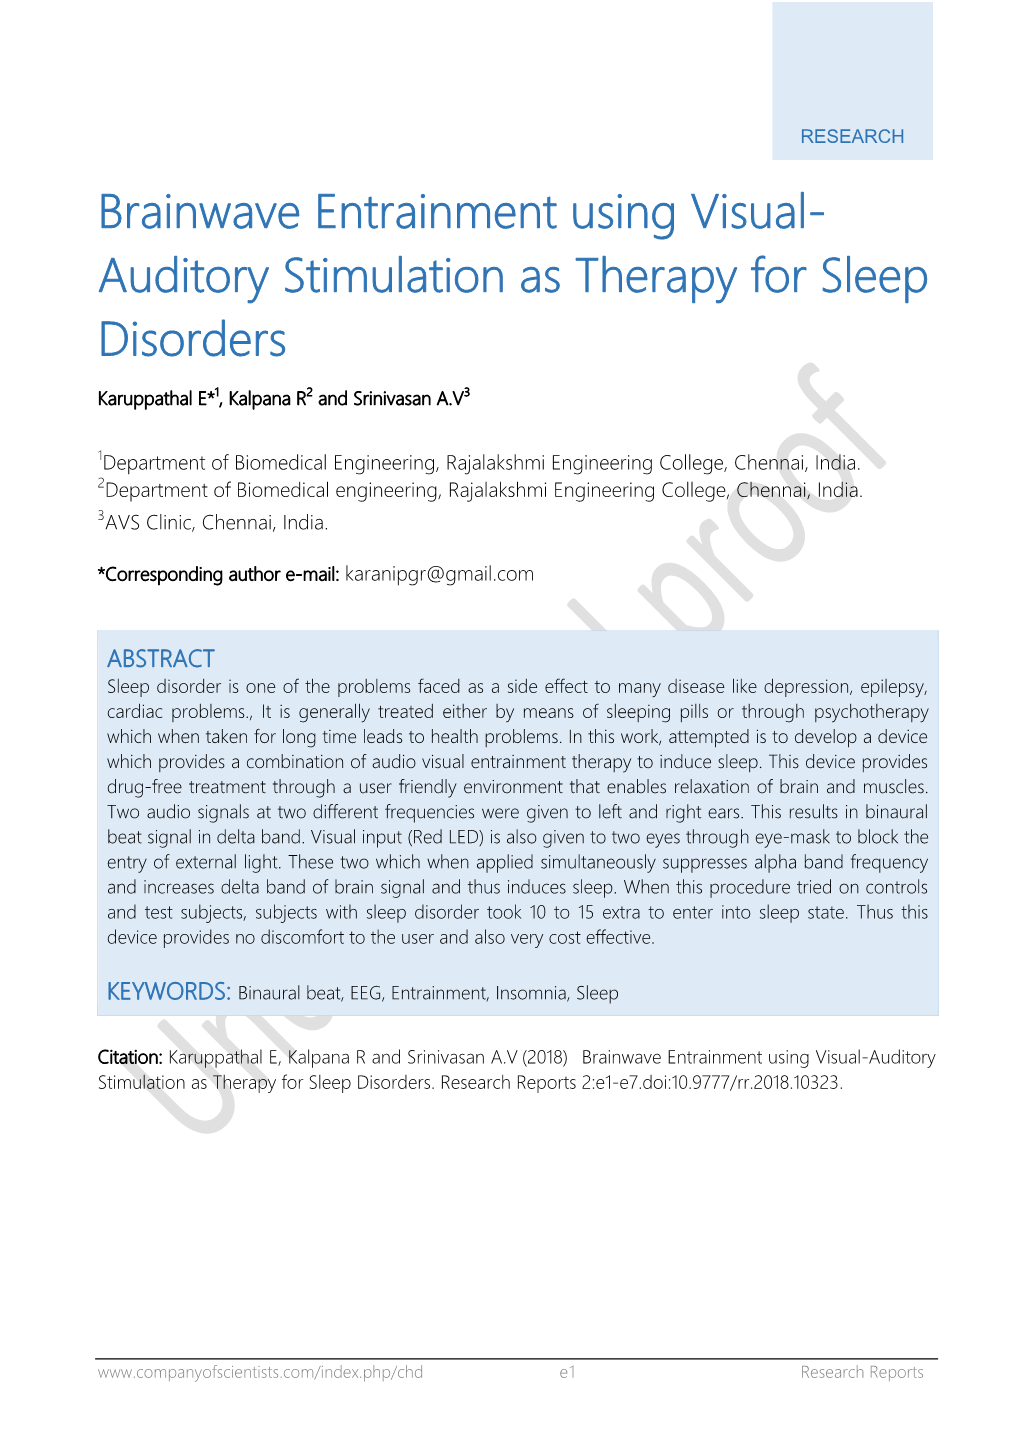 Brainwave Entrainment Using Visual- Auditory Stimulation As Therapy for Sleep Disorders